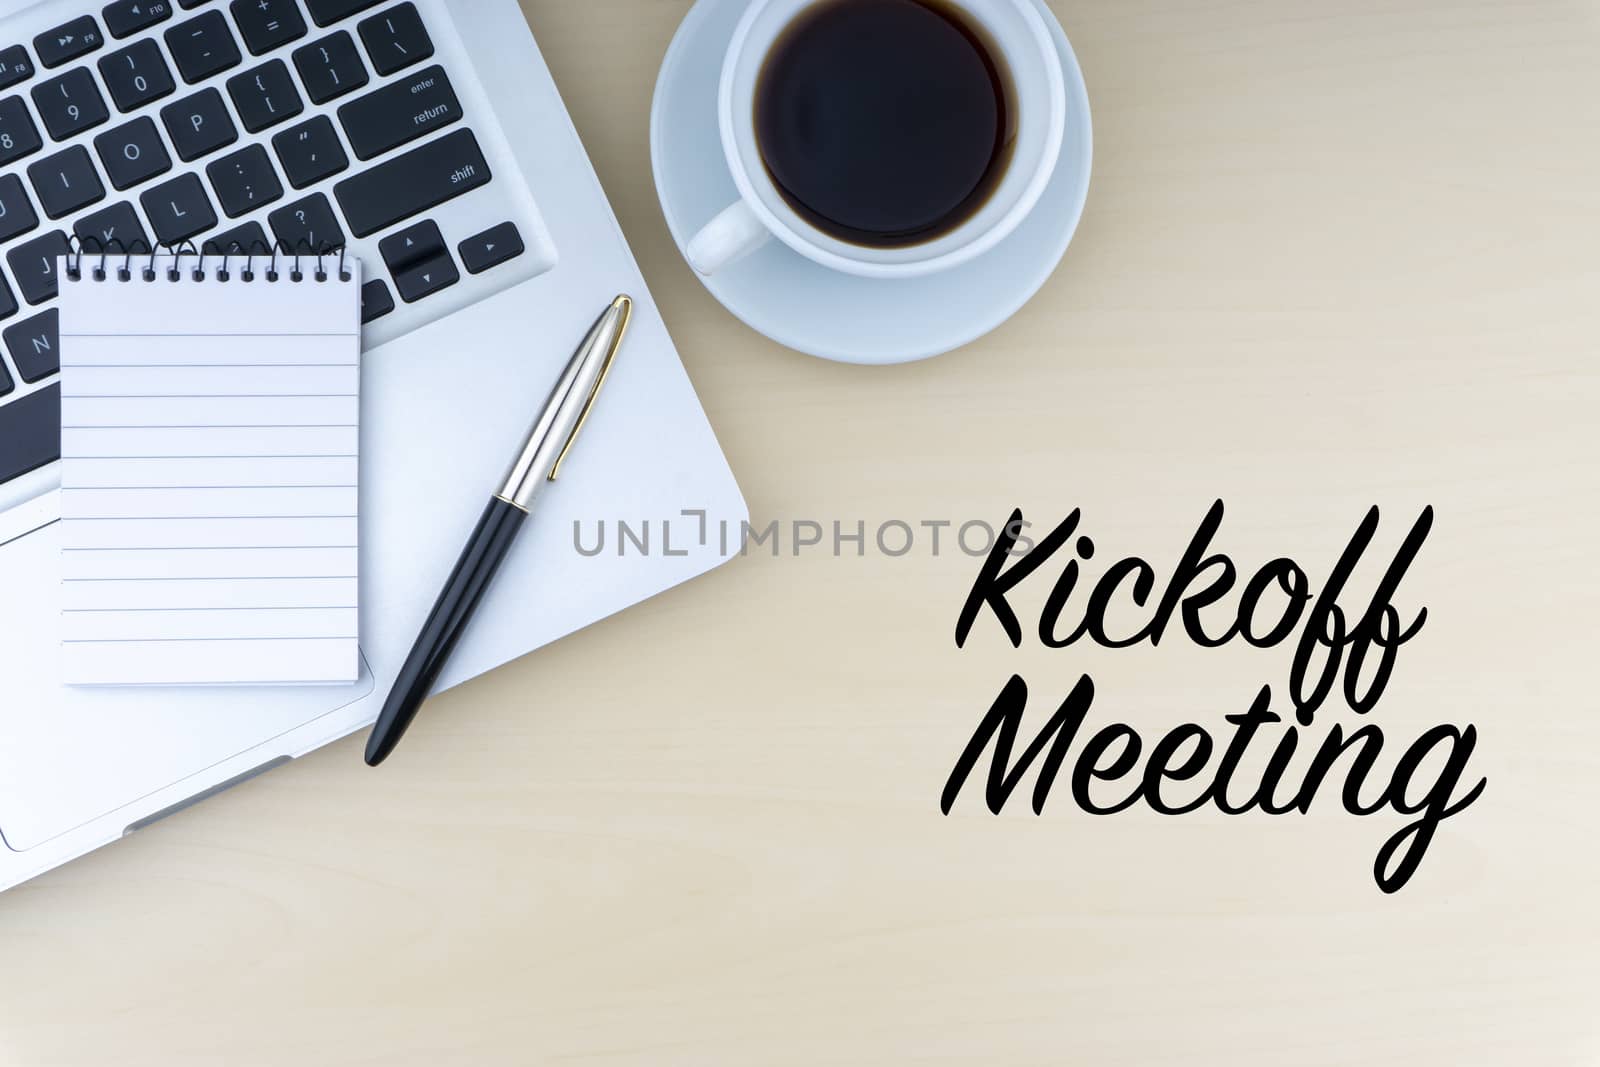 KICKOFF MEETING text with fountain pen, notepad, laptop and cup of coffee on wooden background. Business and copy space concept.
